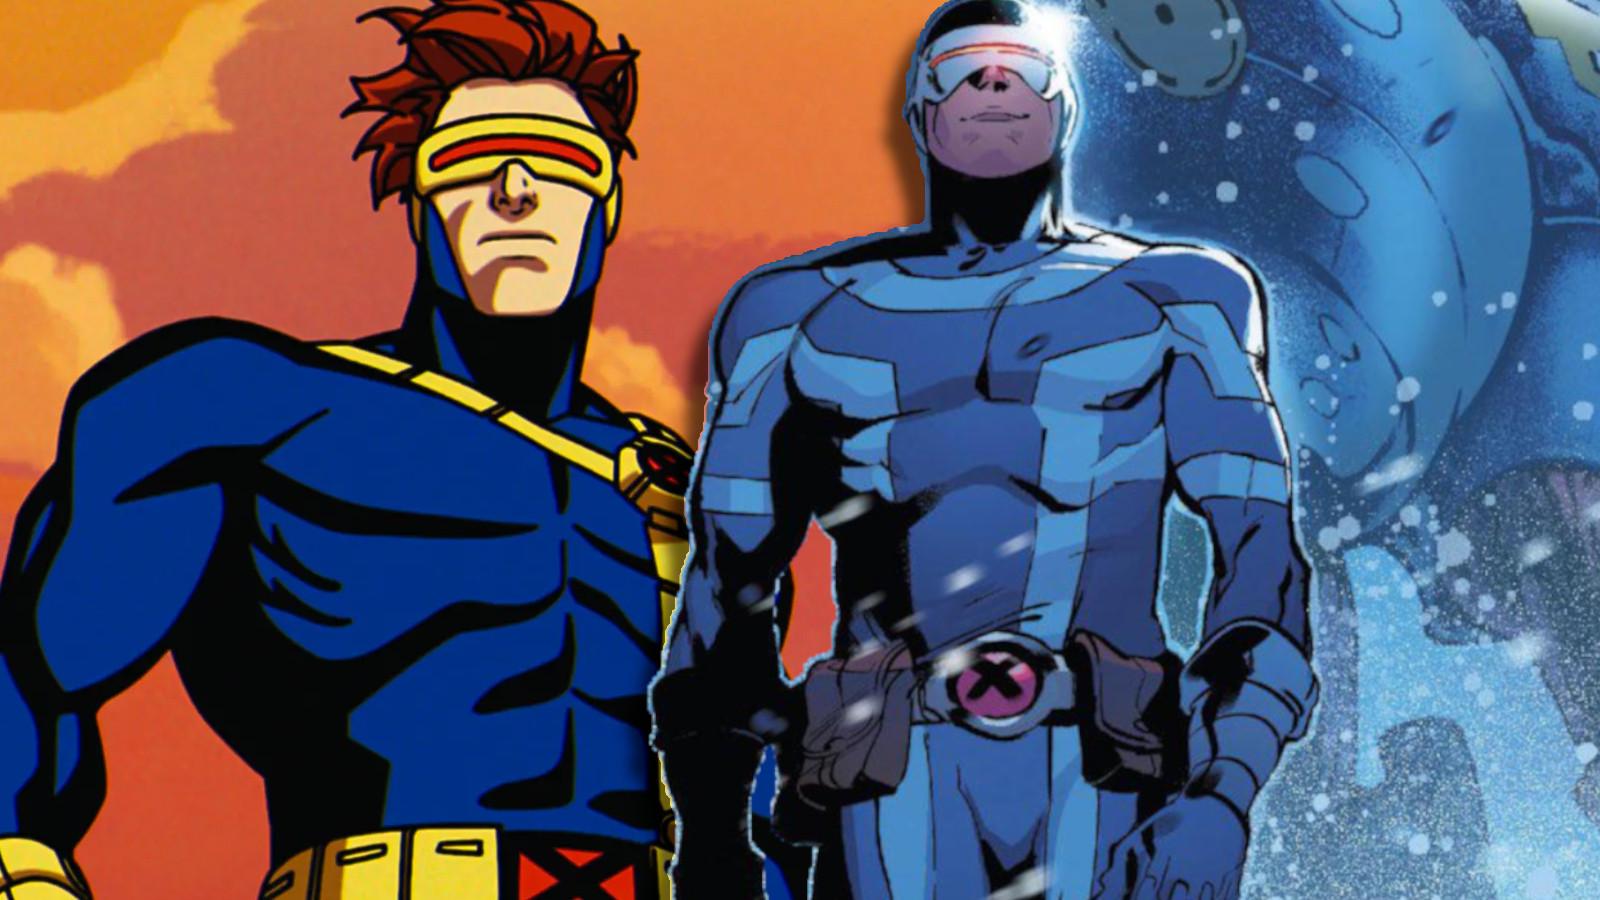 Cyclops from X-Men '97 and A.X.E. Judgment Day